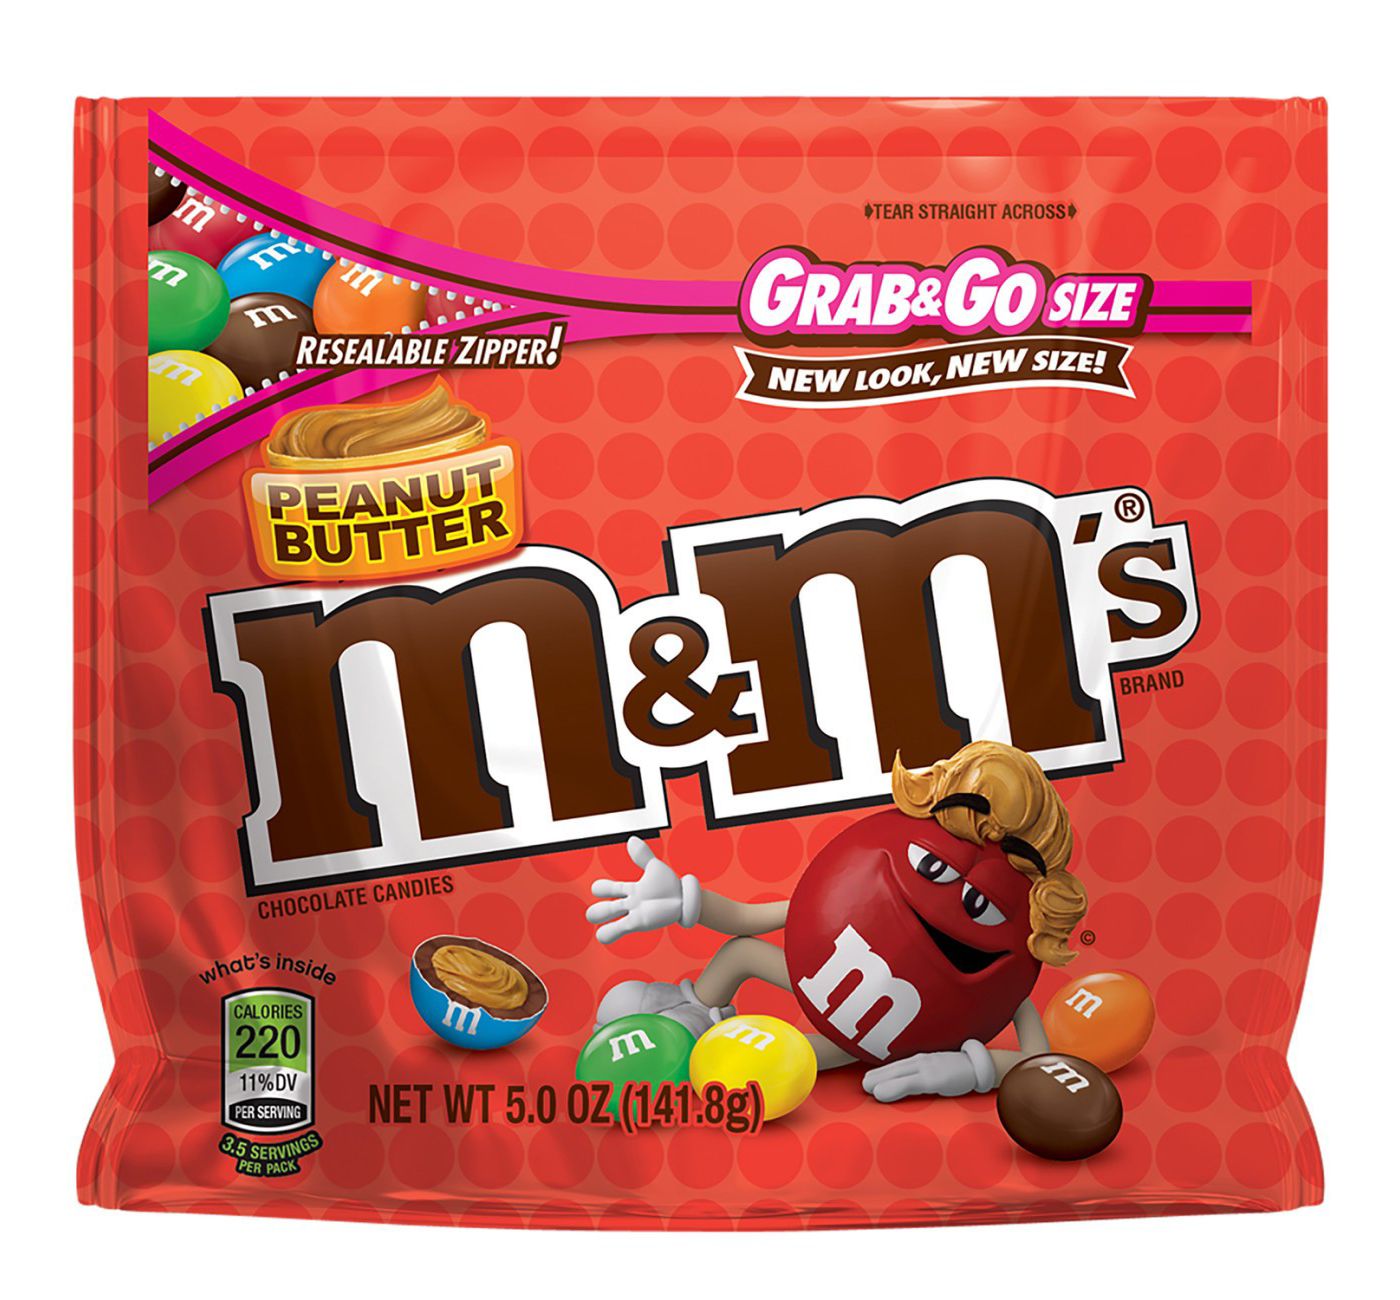 You Can Get A 5 Pound Bag Of Peanut M&Ms, Because Why Not?